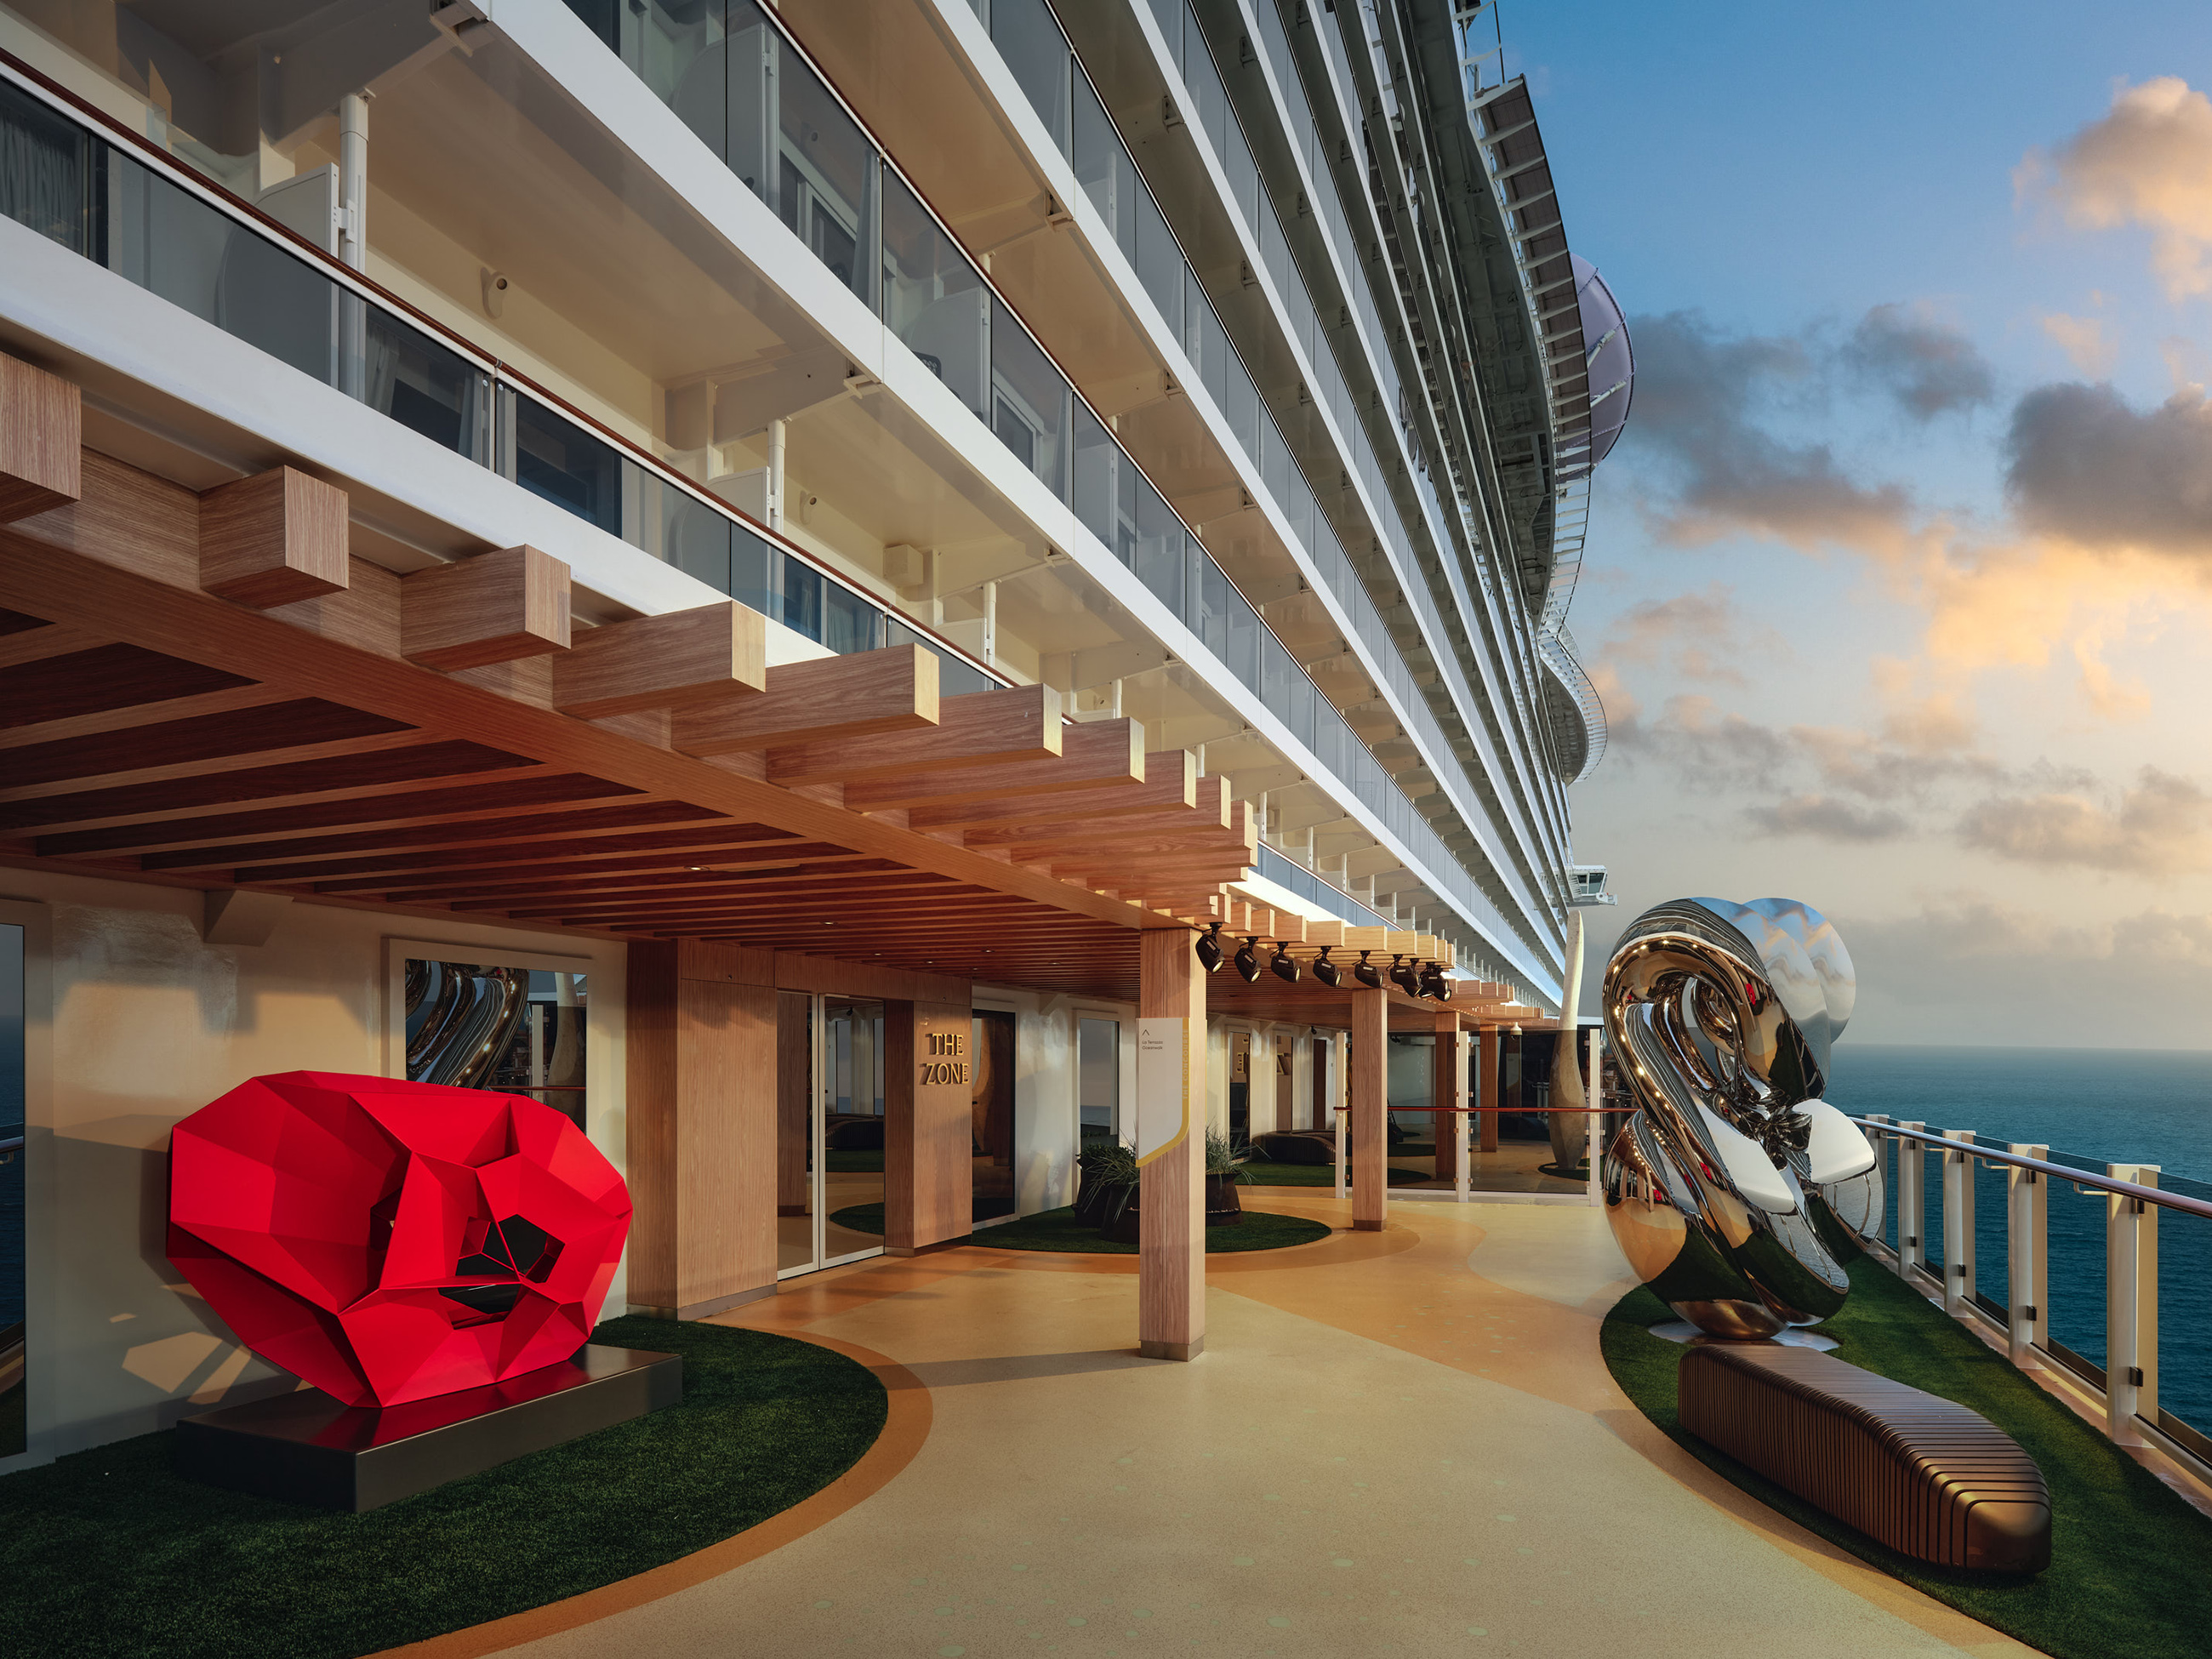 The Concourse outdoor sculpture garden has been completely reimagined aboard Norwegian Viva, displaying works from six returning artists who have had their works on display across the Norwegian Cruise Line Holdings Ltd. fleet.